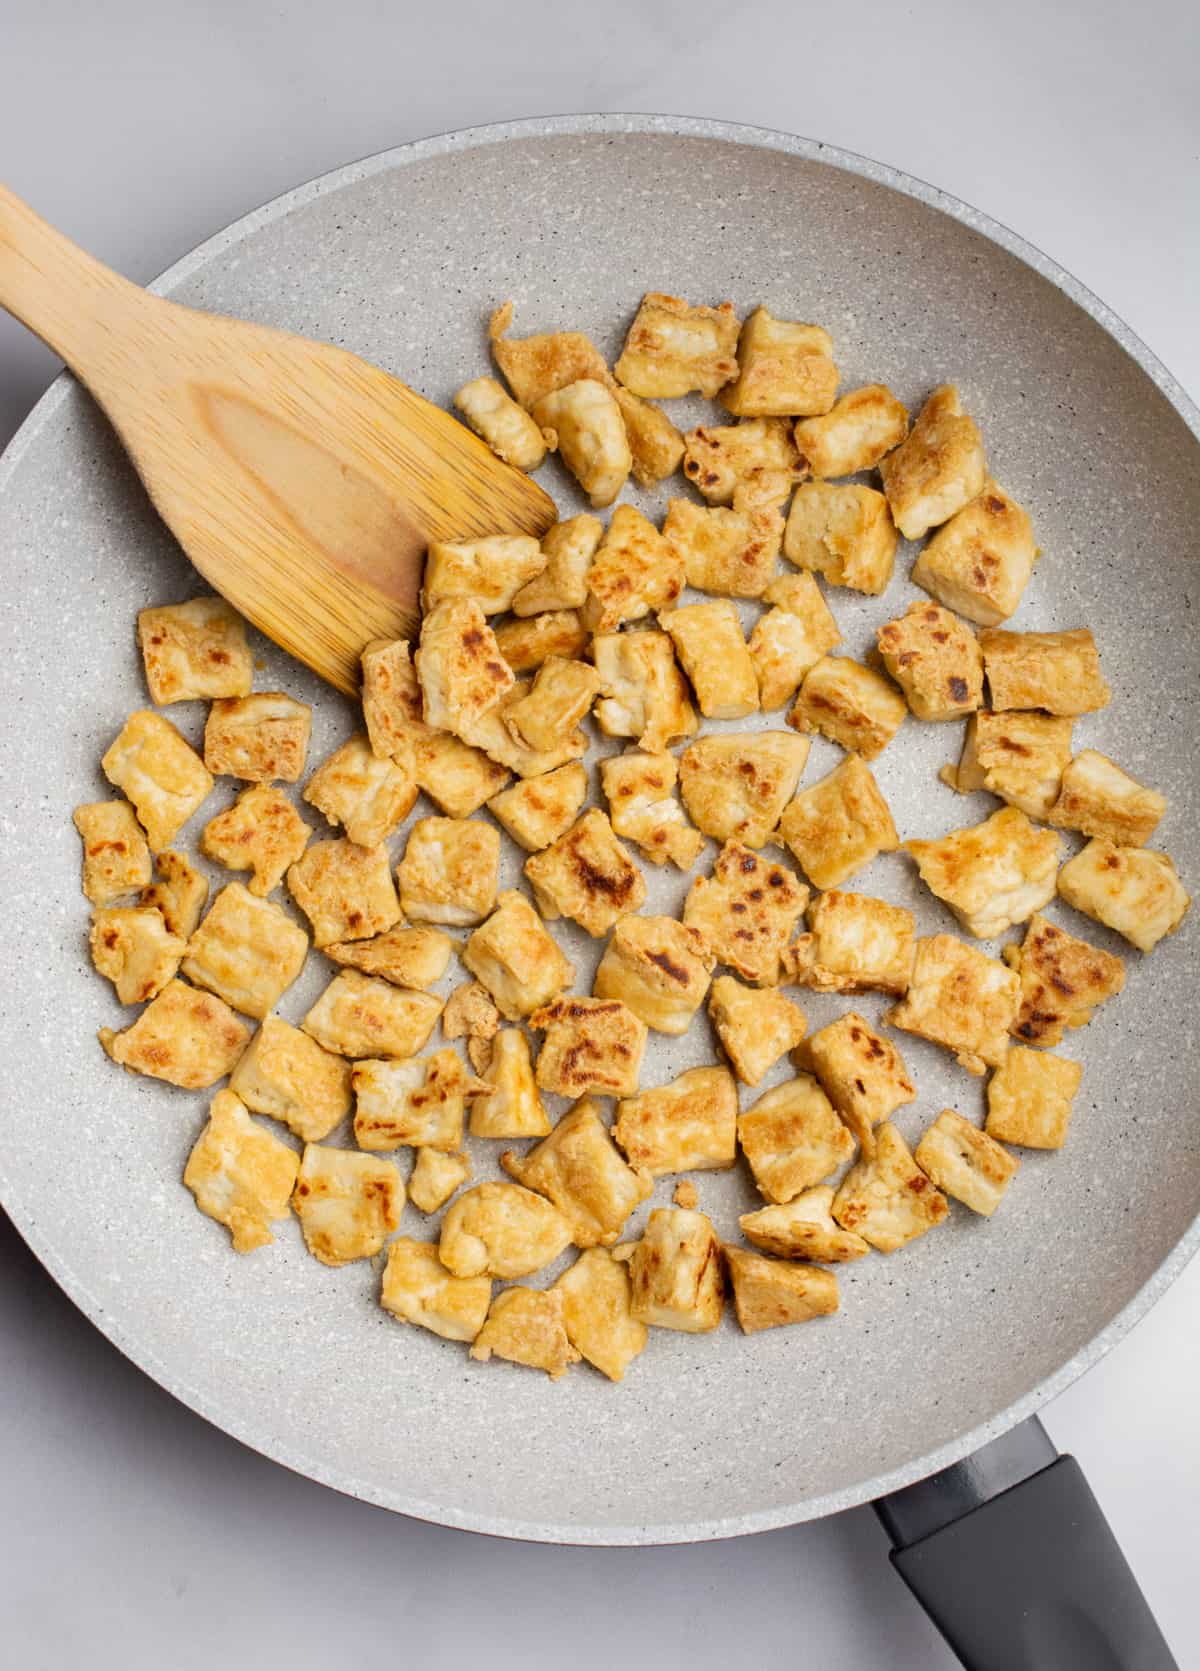 Bite sized pieces of pan fried tofu in a pan with a spatula.